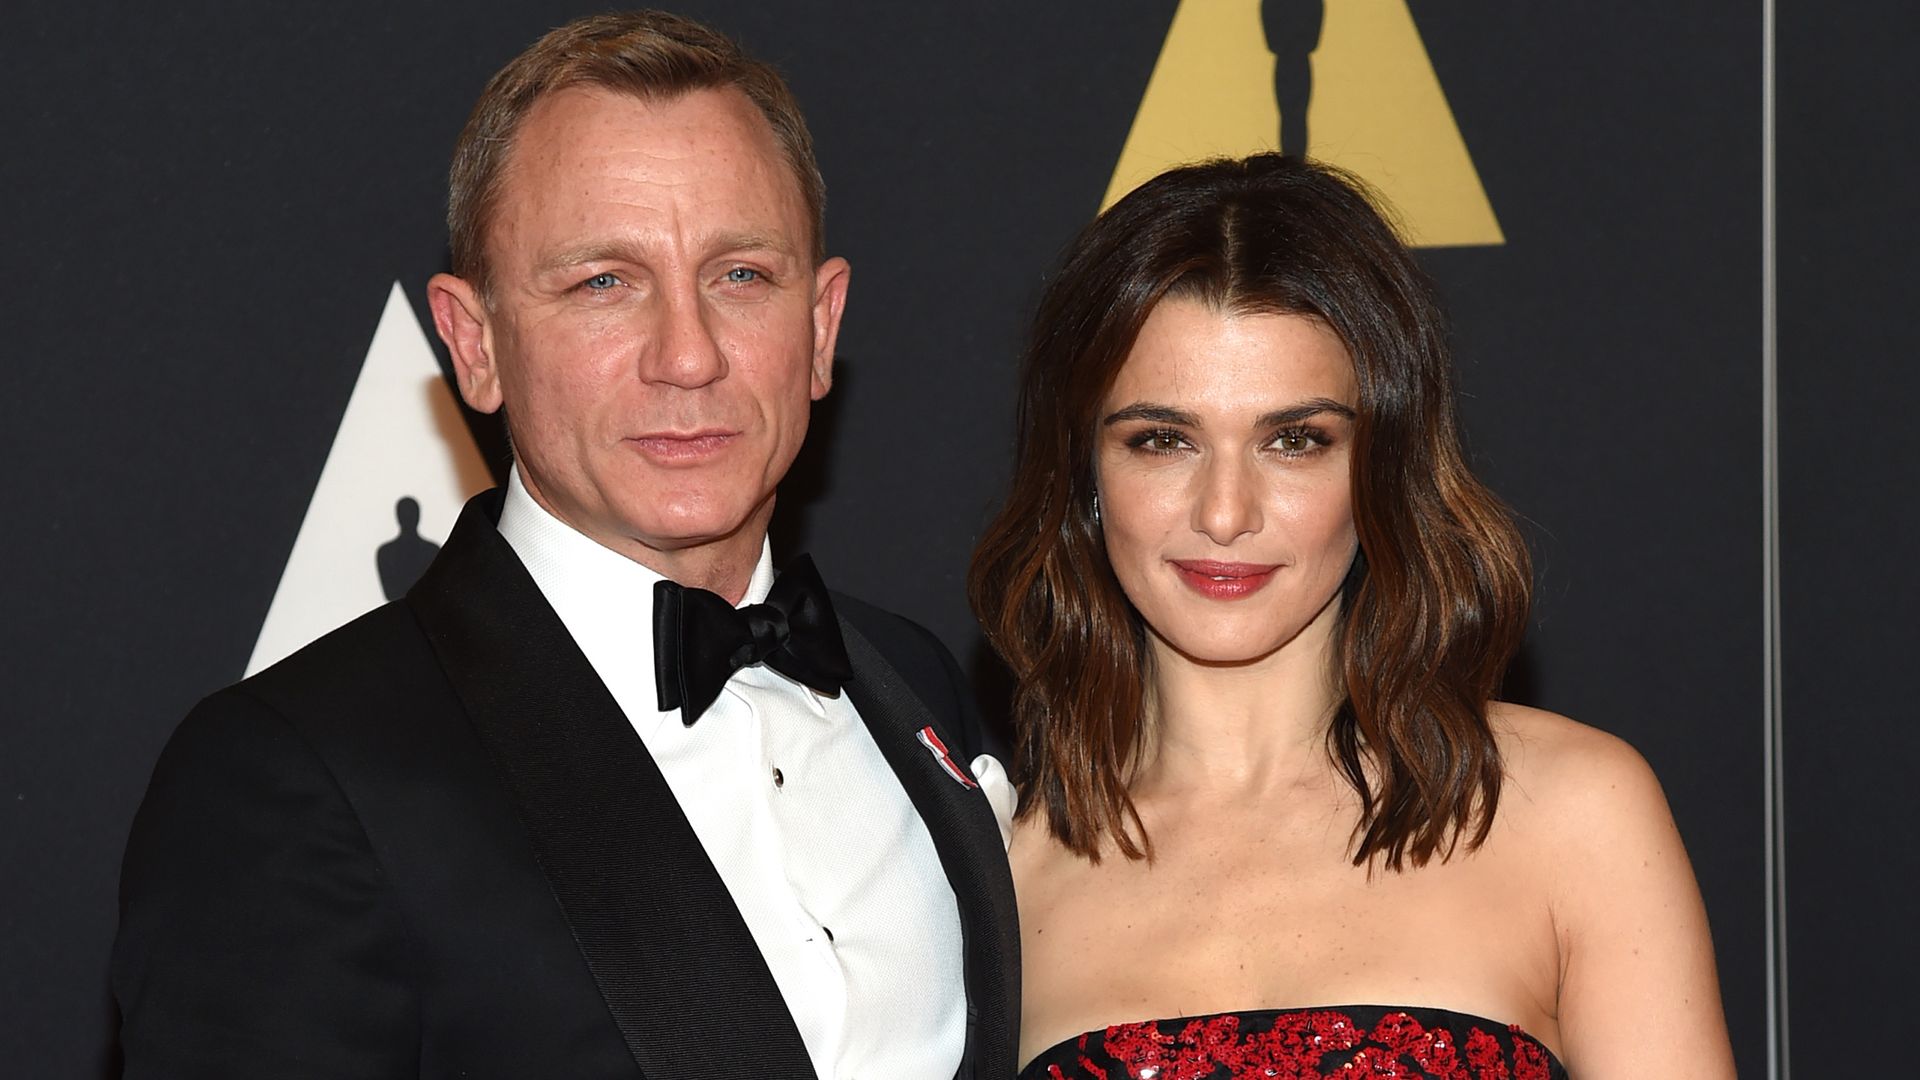 Daniel Craig and Rachel Weisz at the AMPAS Governors Awards